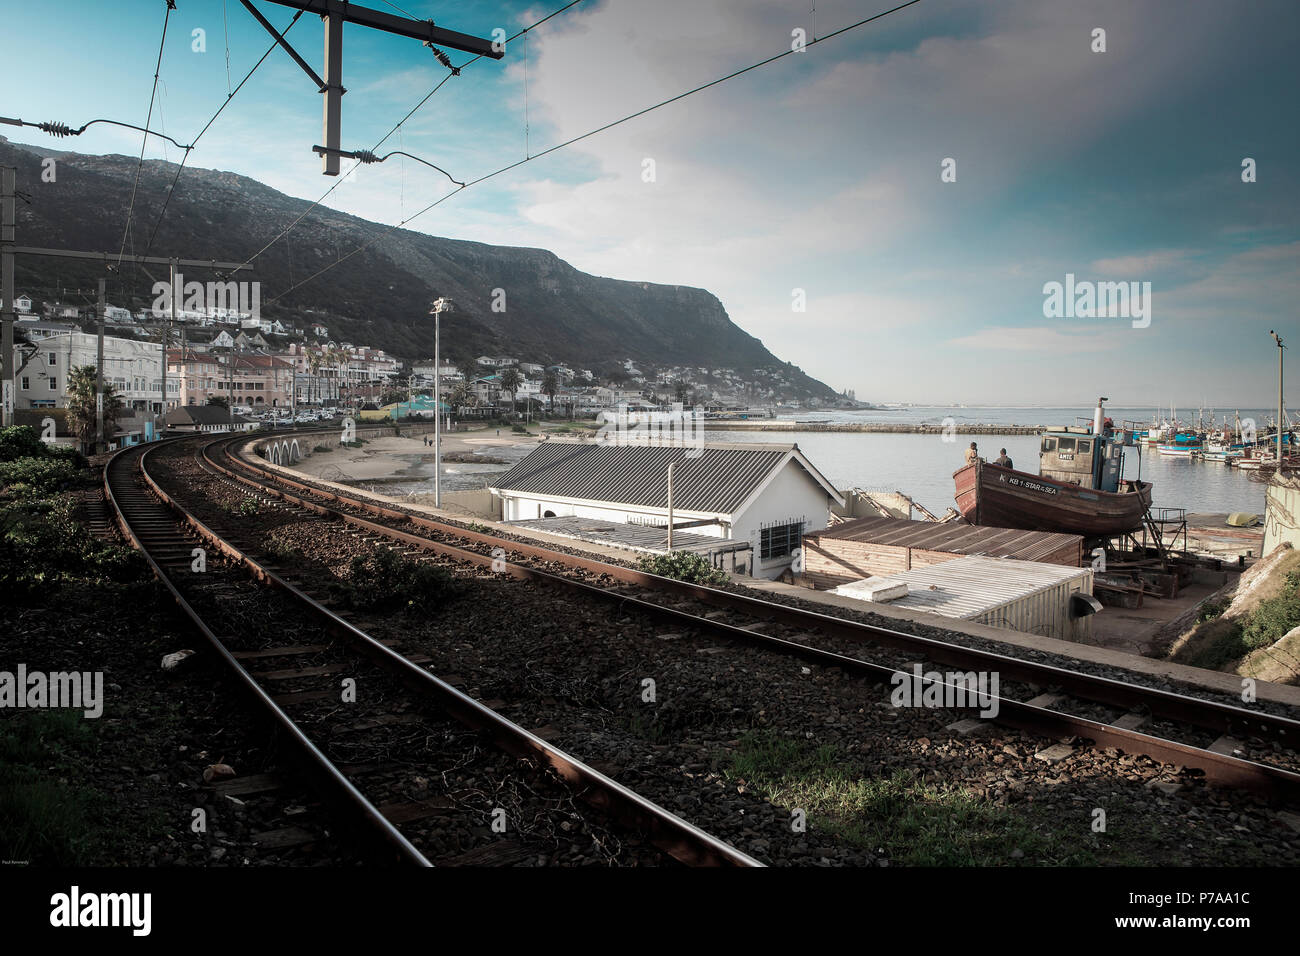 Train tracks at Kalk Bay, Cape Town, South Africa Stock Photo